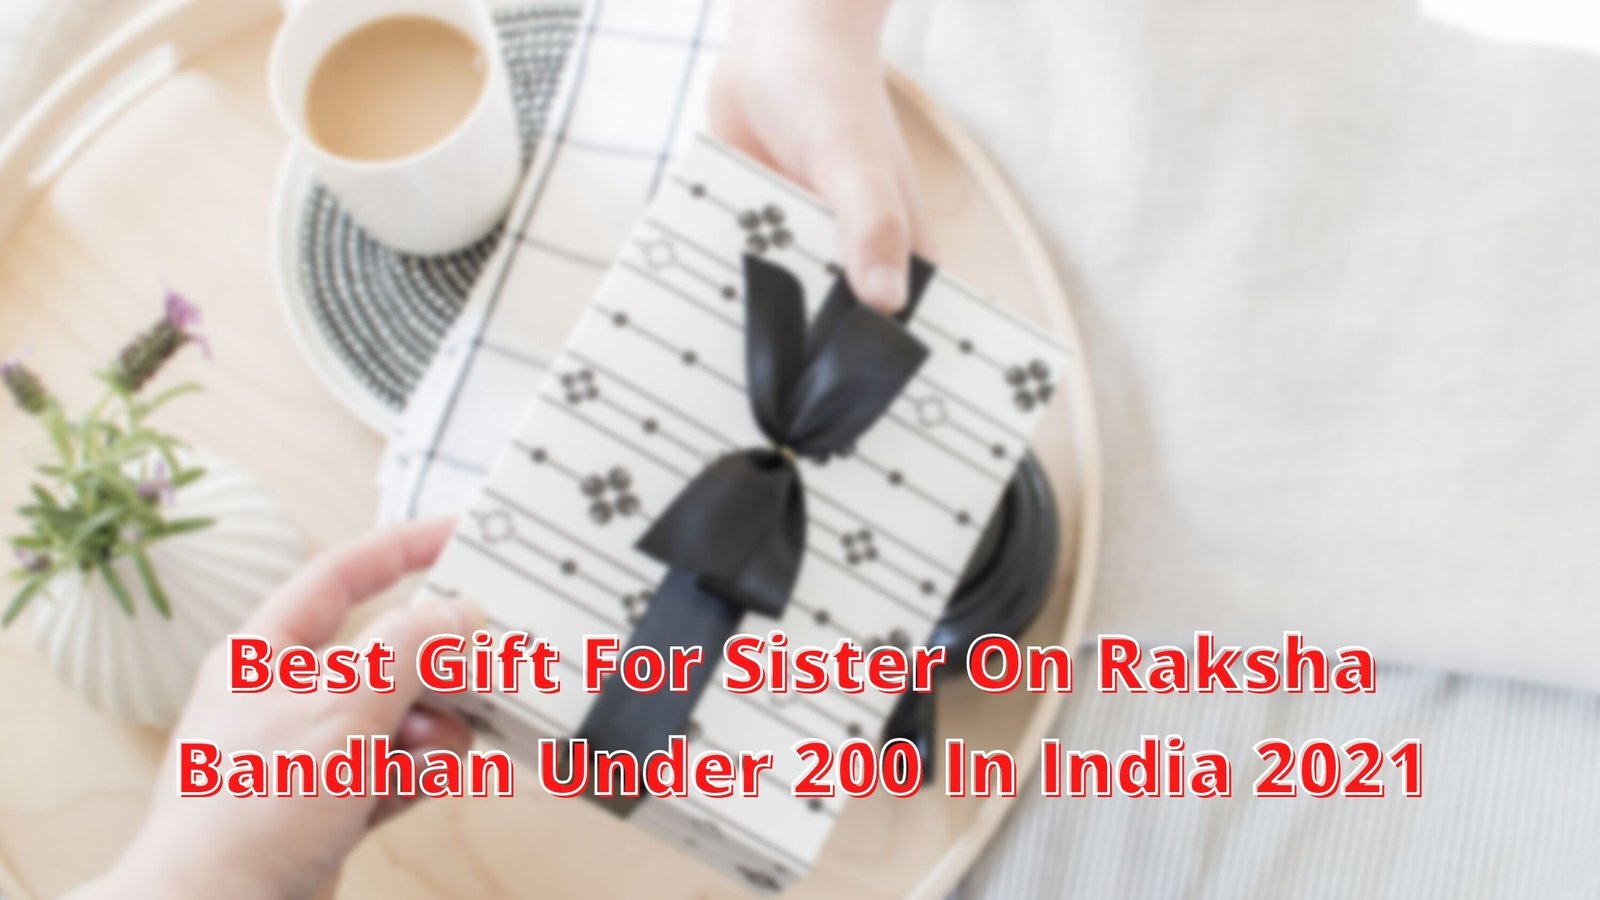 You are currently viewing Top 10 Best Gift For Sister On Raksha Bandhan Under 200 In Online India 2021 [Bengali]